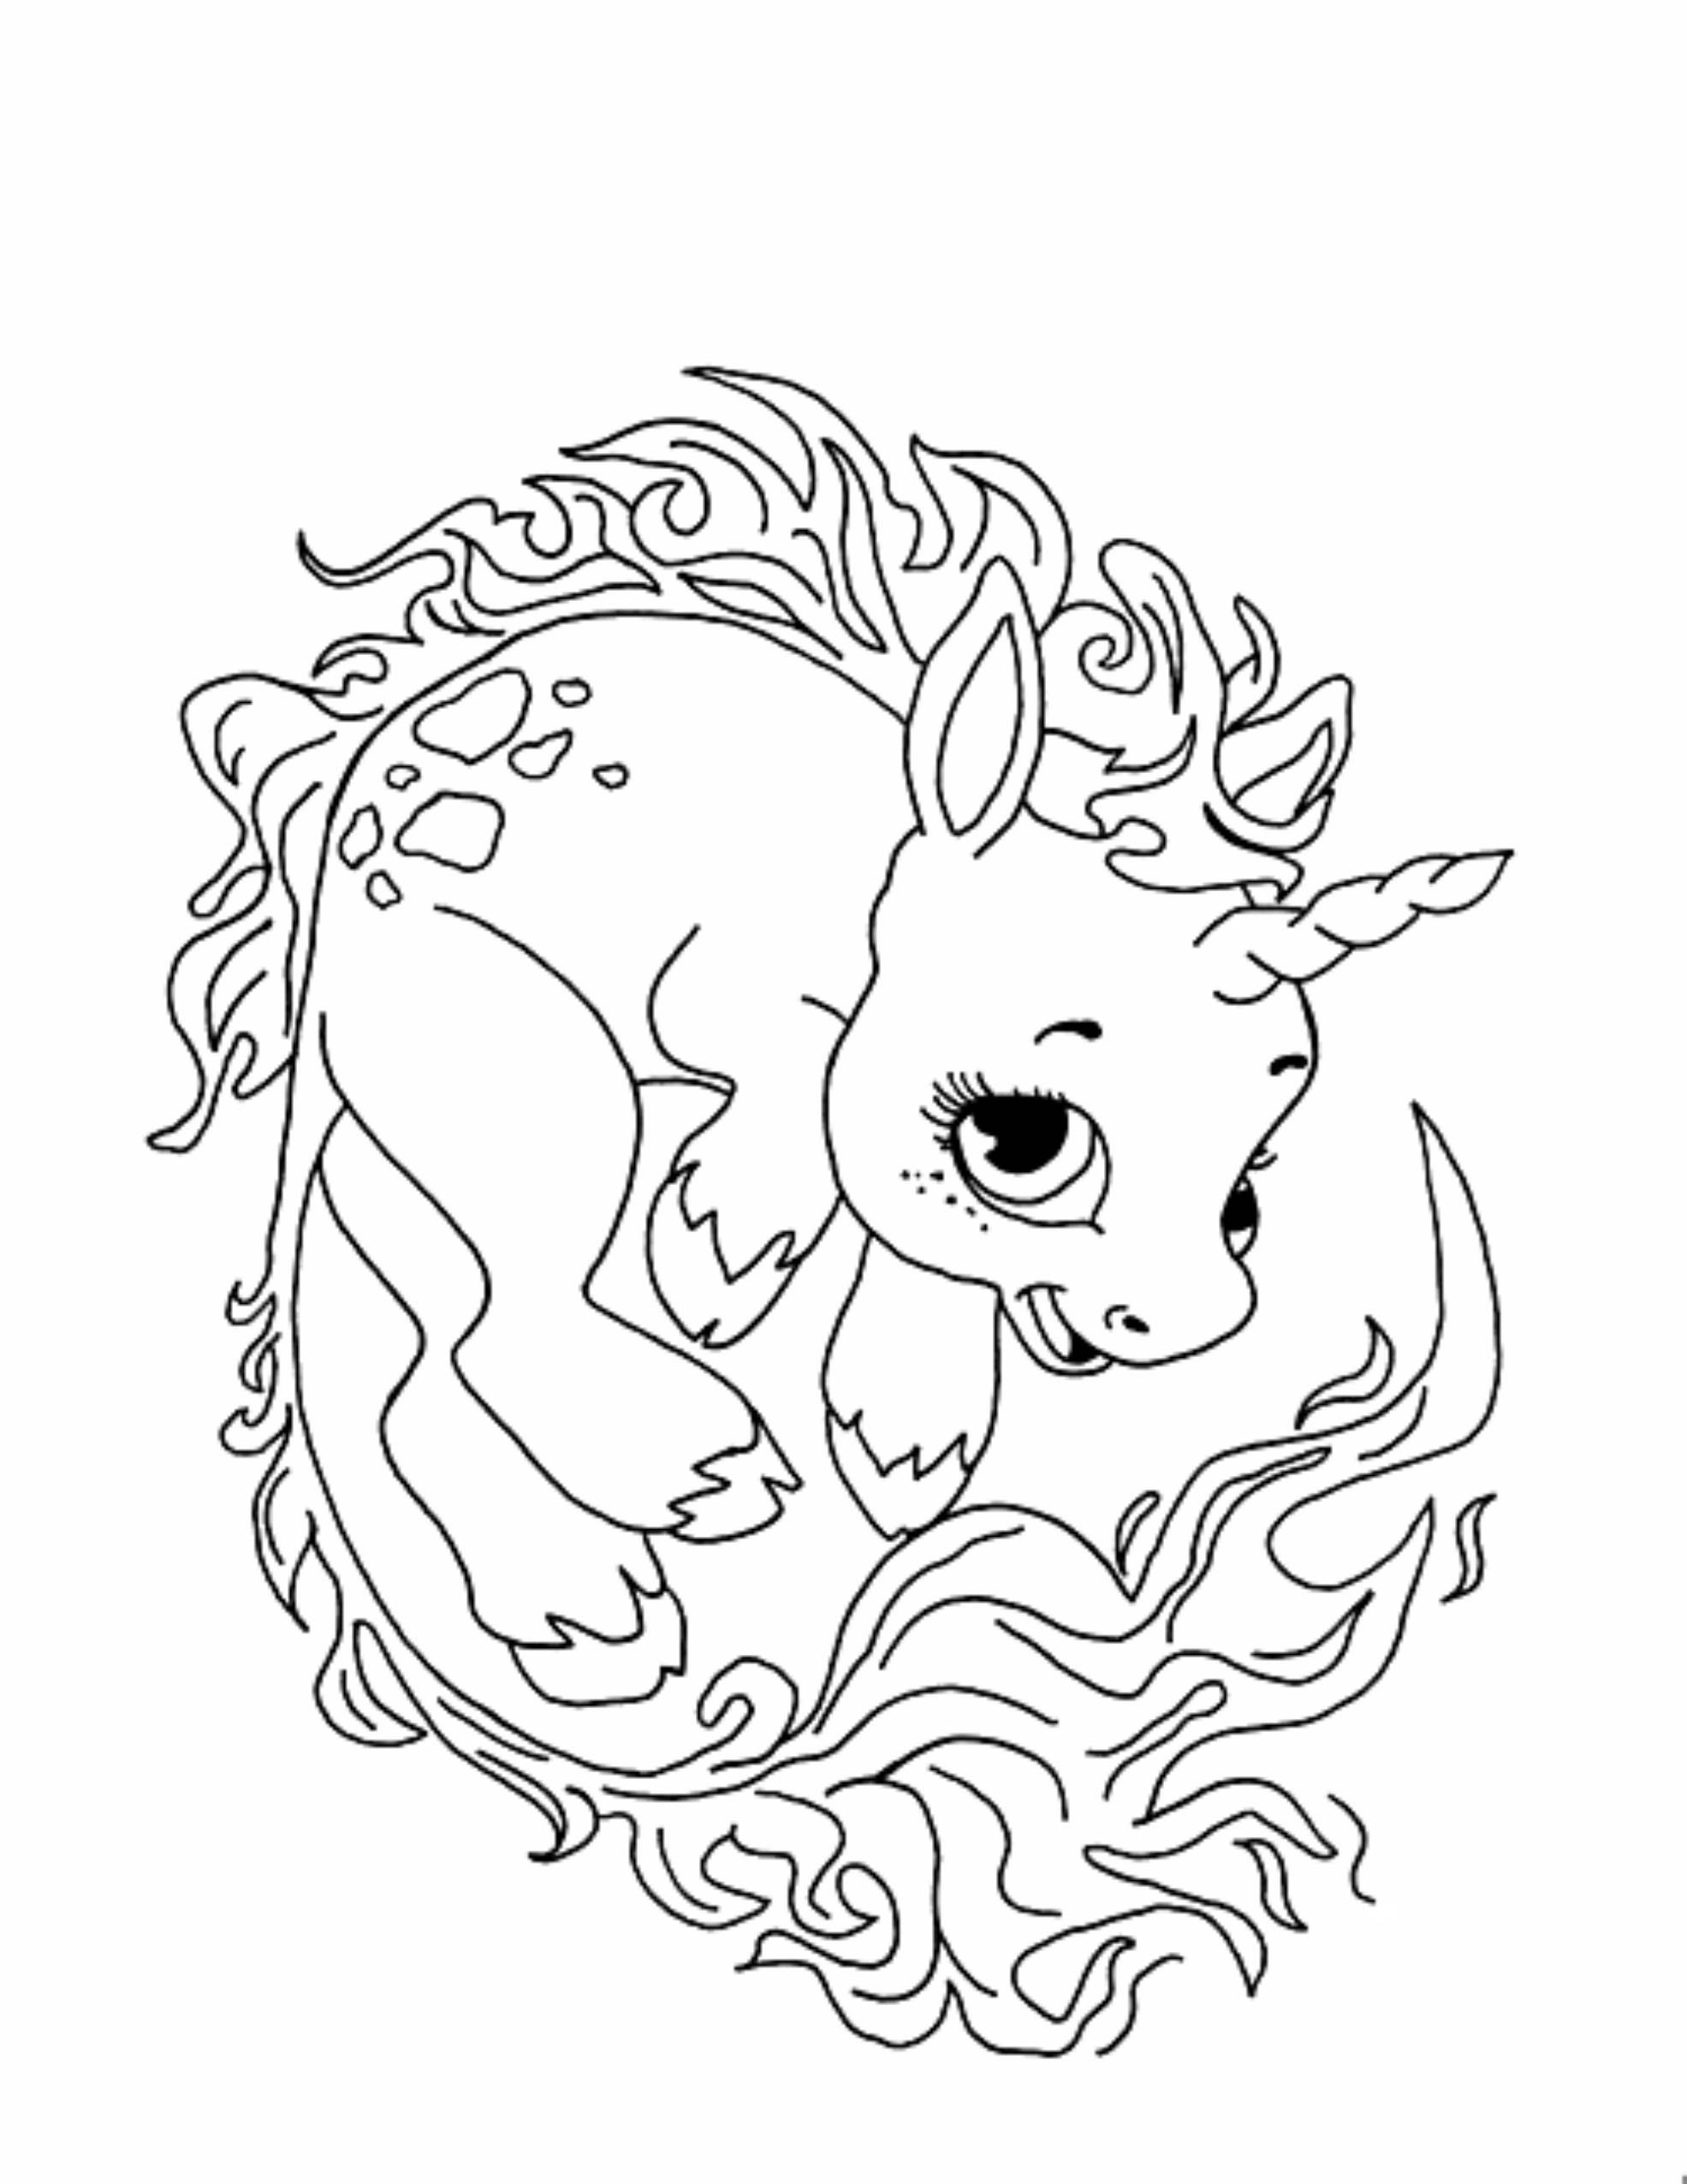 Coloring Pages Of Unicorns to Print Wallpaper